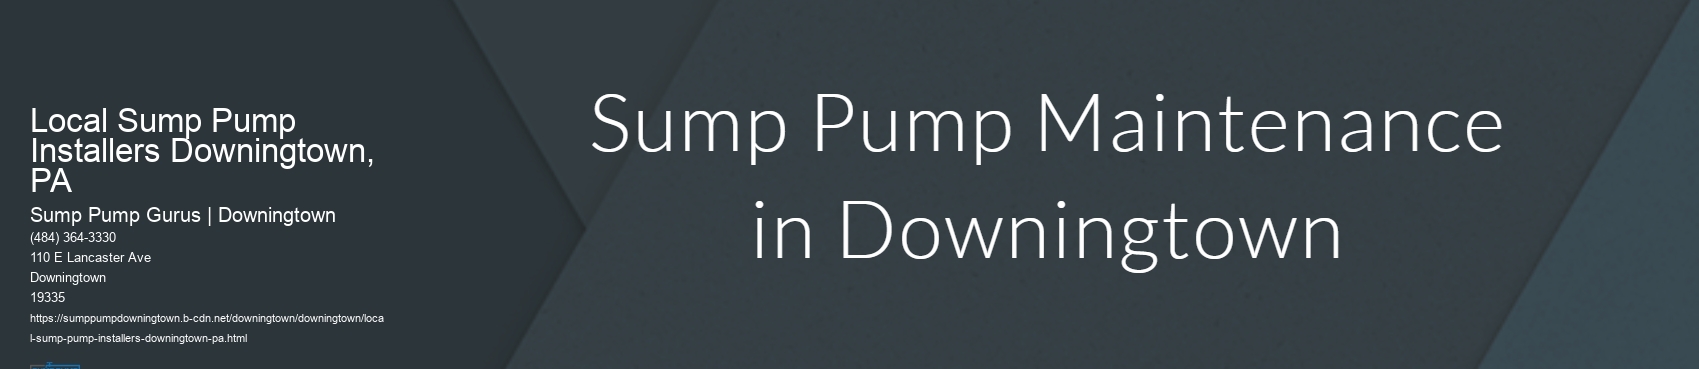 Local Sump Pump Installers Downingtown, PA